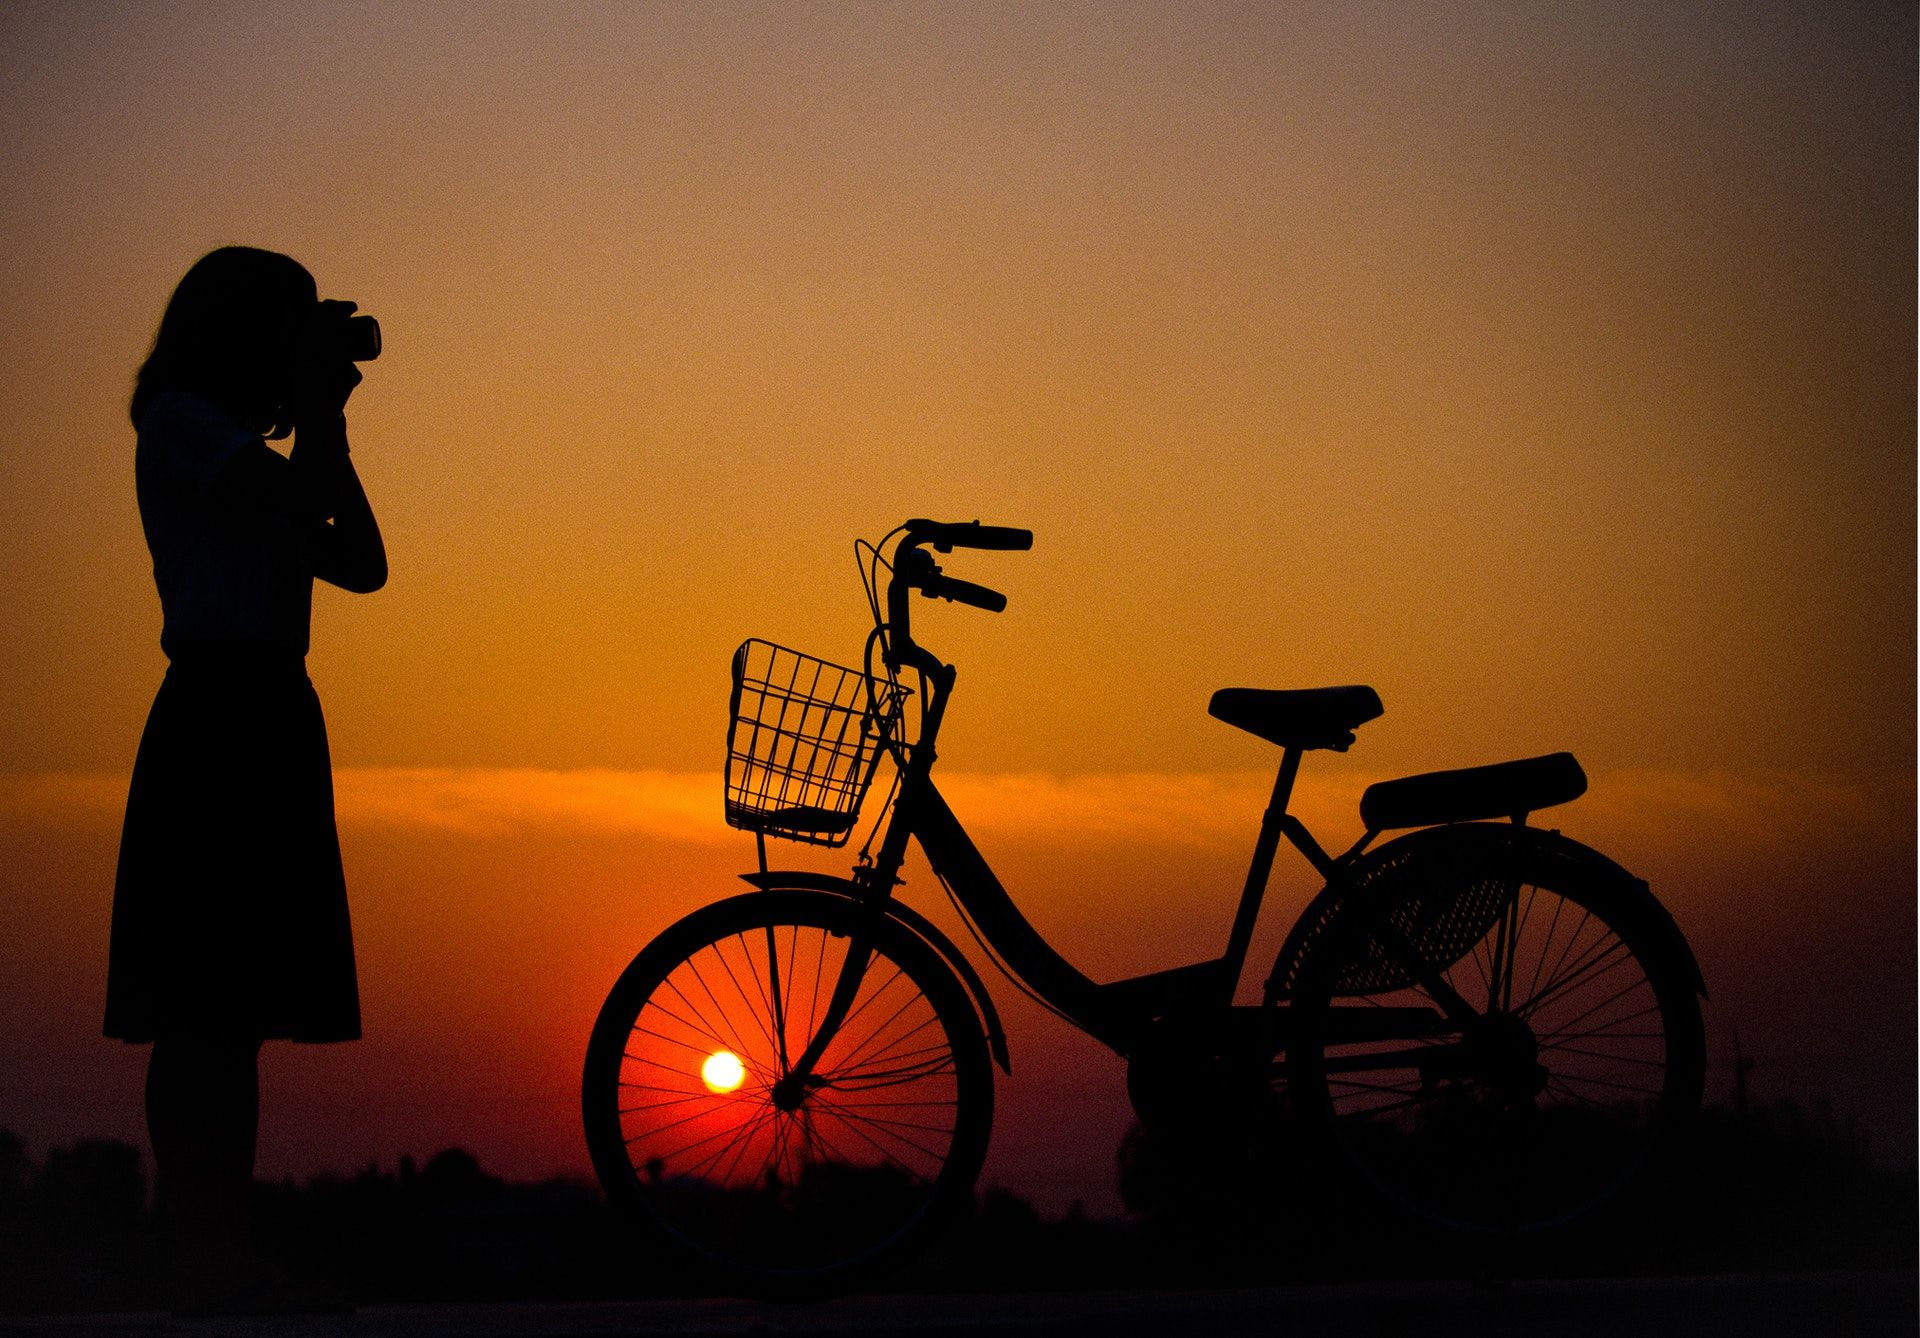 A girl photographing a bike at sunset